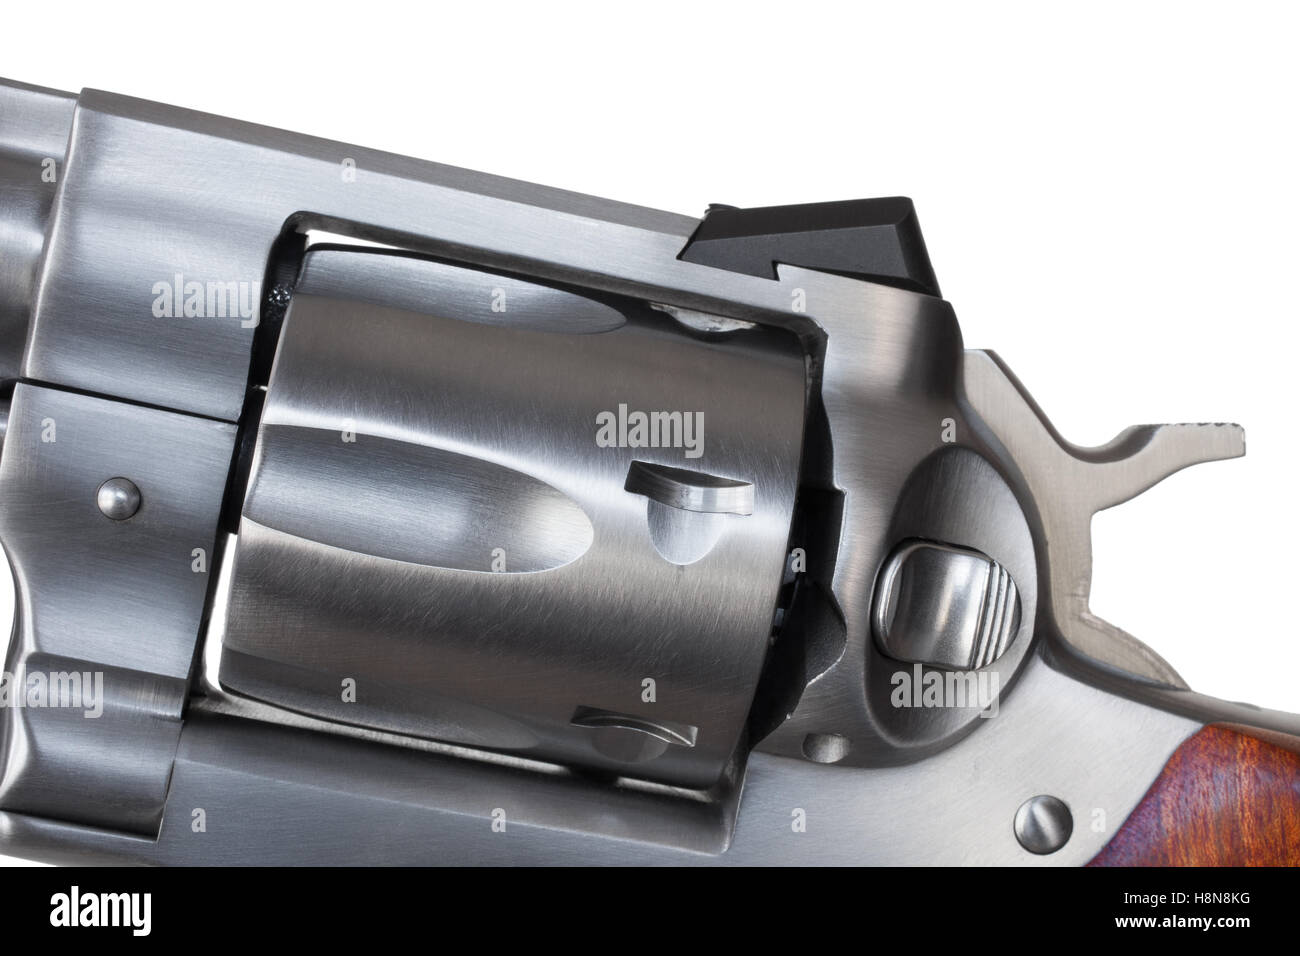 Steel cylinder in a double action revolver isolated on white Stock Photo